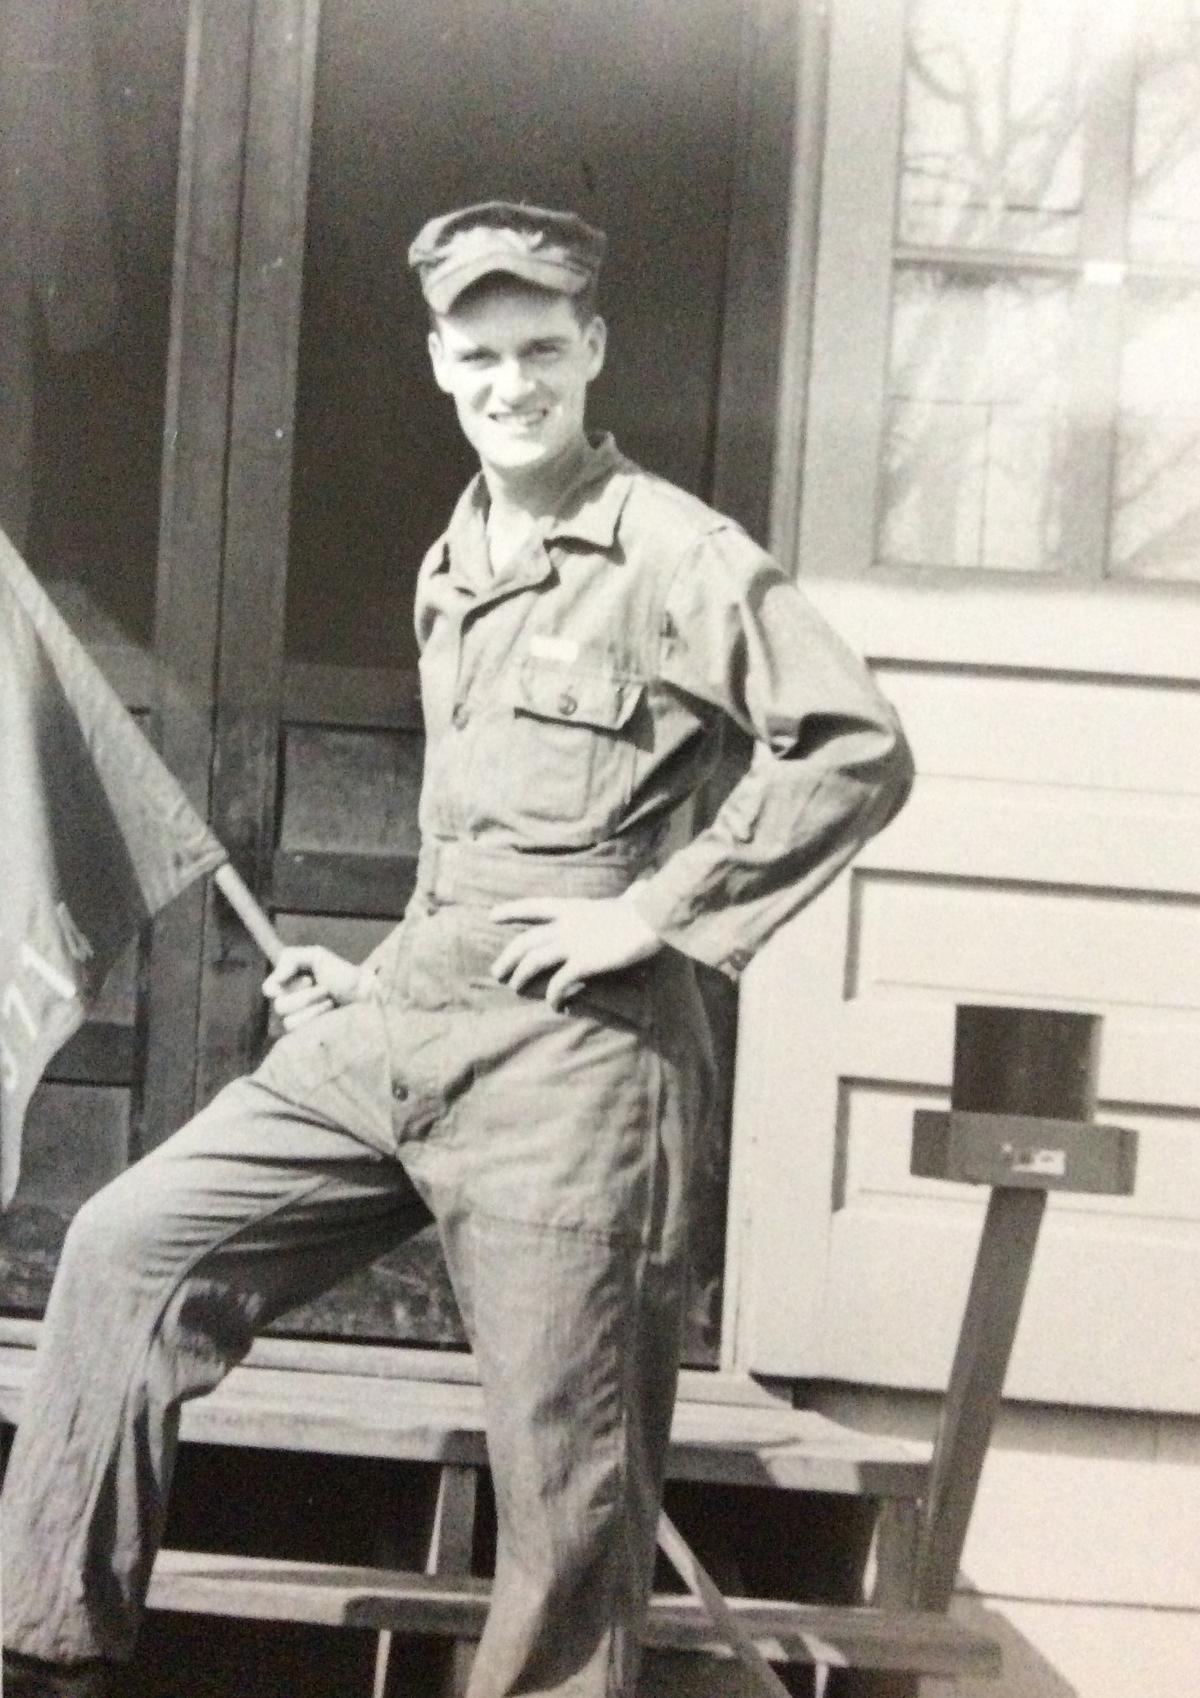 Pop enlisted in the Air Force at the age of 19. (Courtesy of <a href="https://www.instagram.com/popshappybreakfast/">@popshappybreakfast</a>)